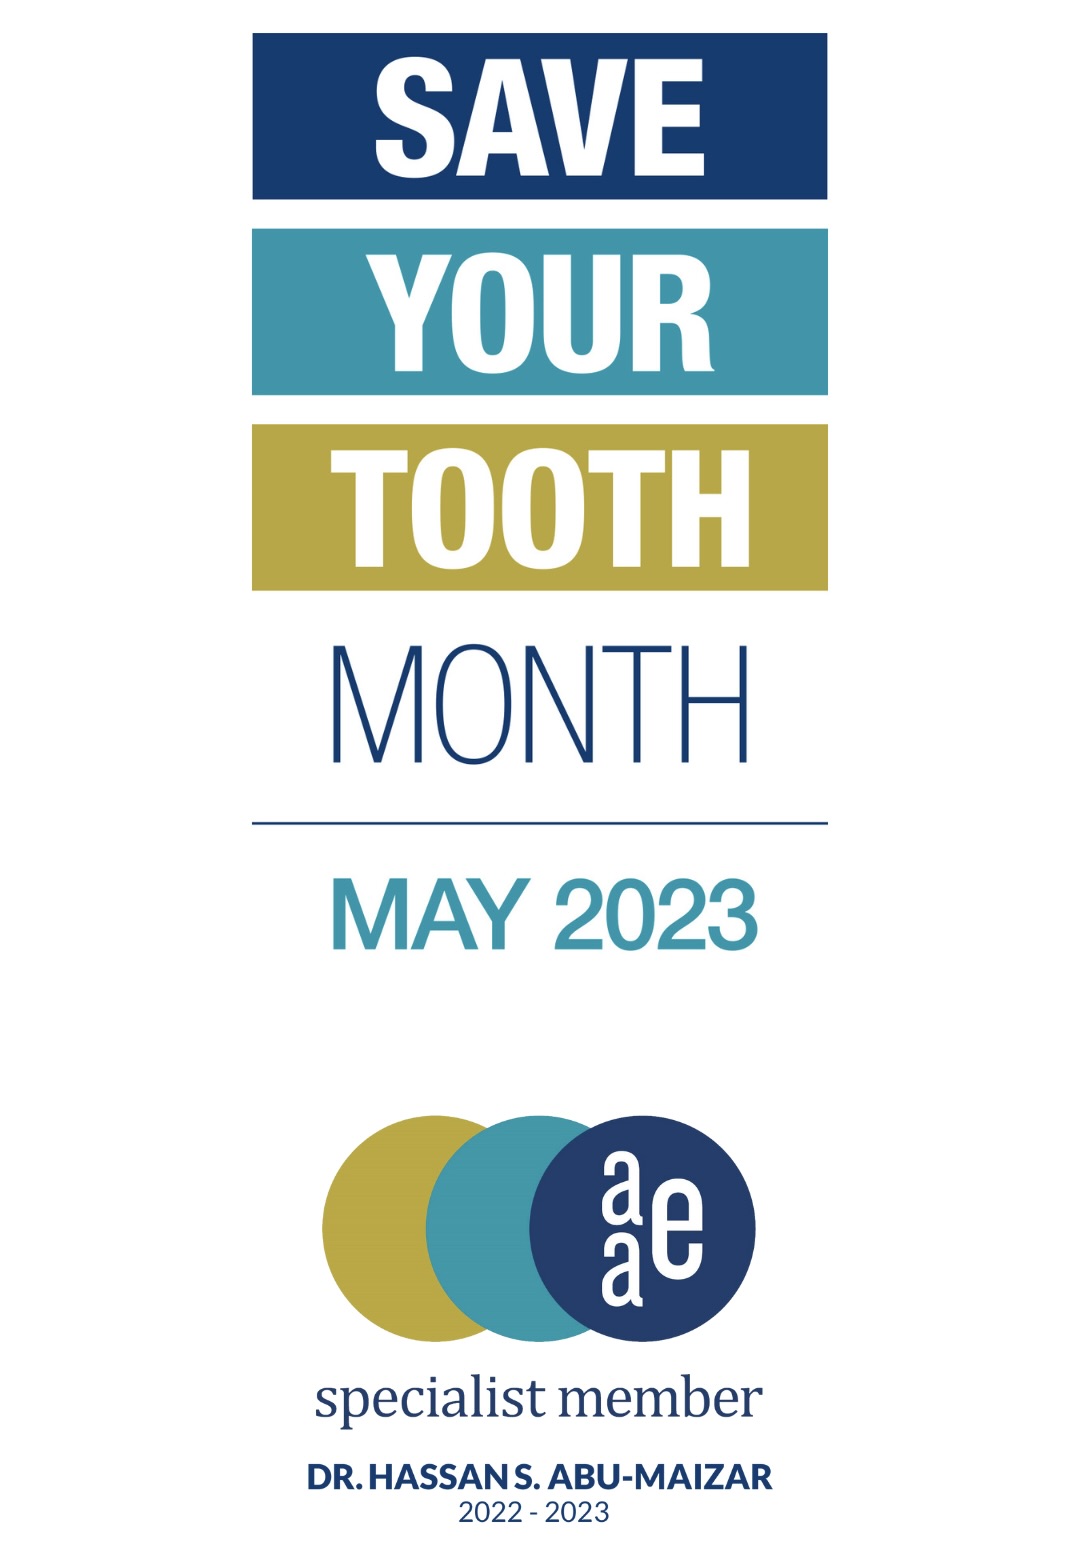 1089104000000064006 zc v43 1683377769759 save your teeth month.jpe